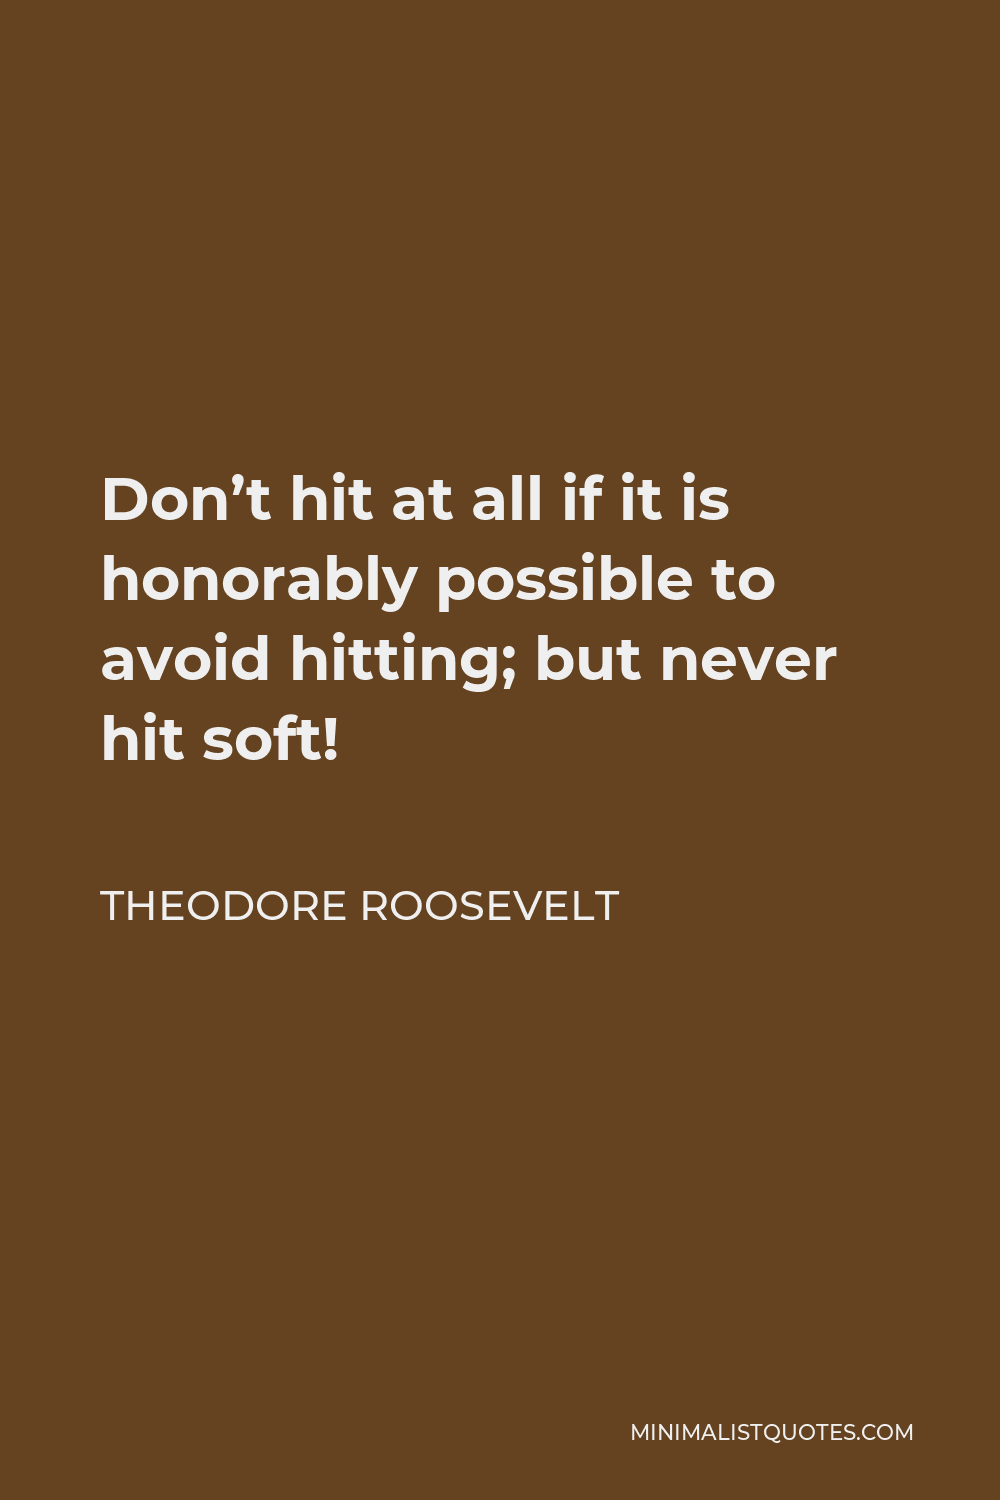 Theodore Roosevelt Quote - Don’t hit at all if it is honorably possible to avoid hitting; but never hit soft!